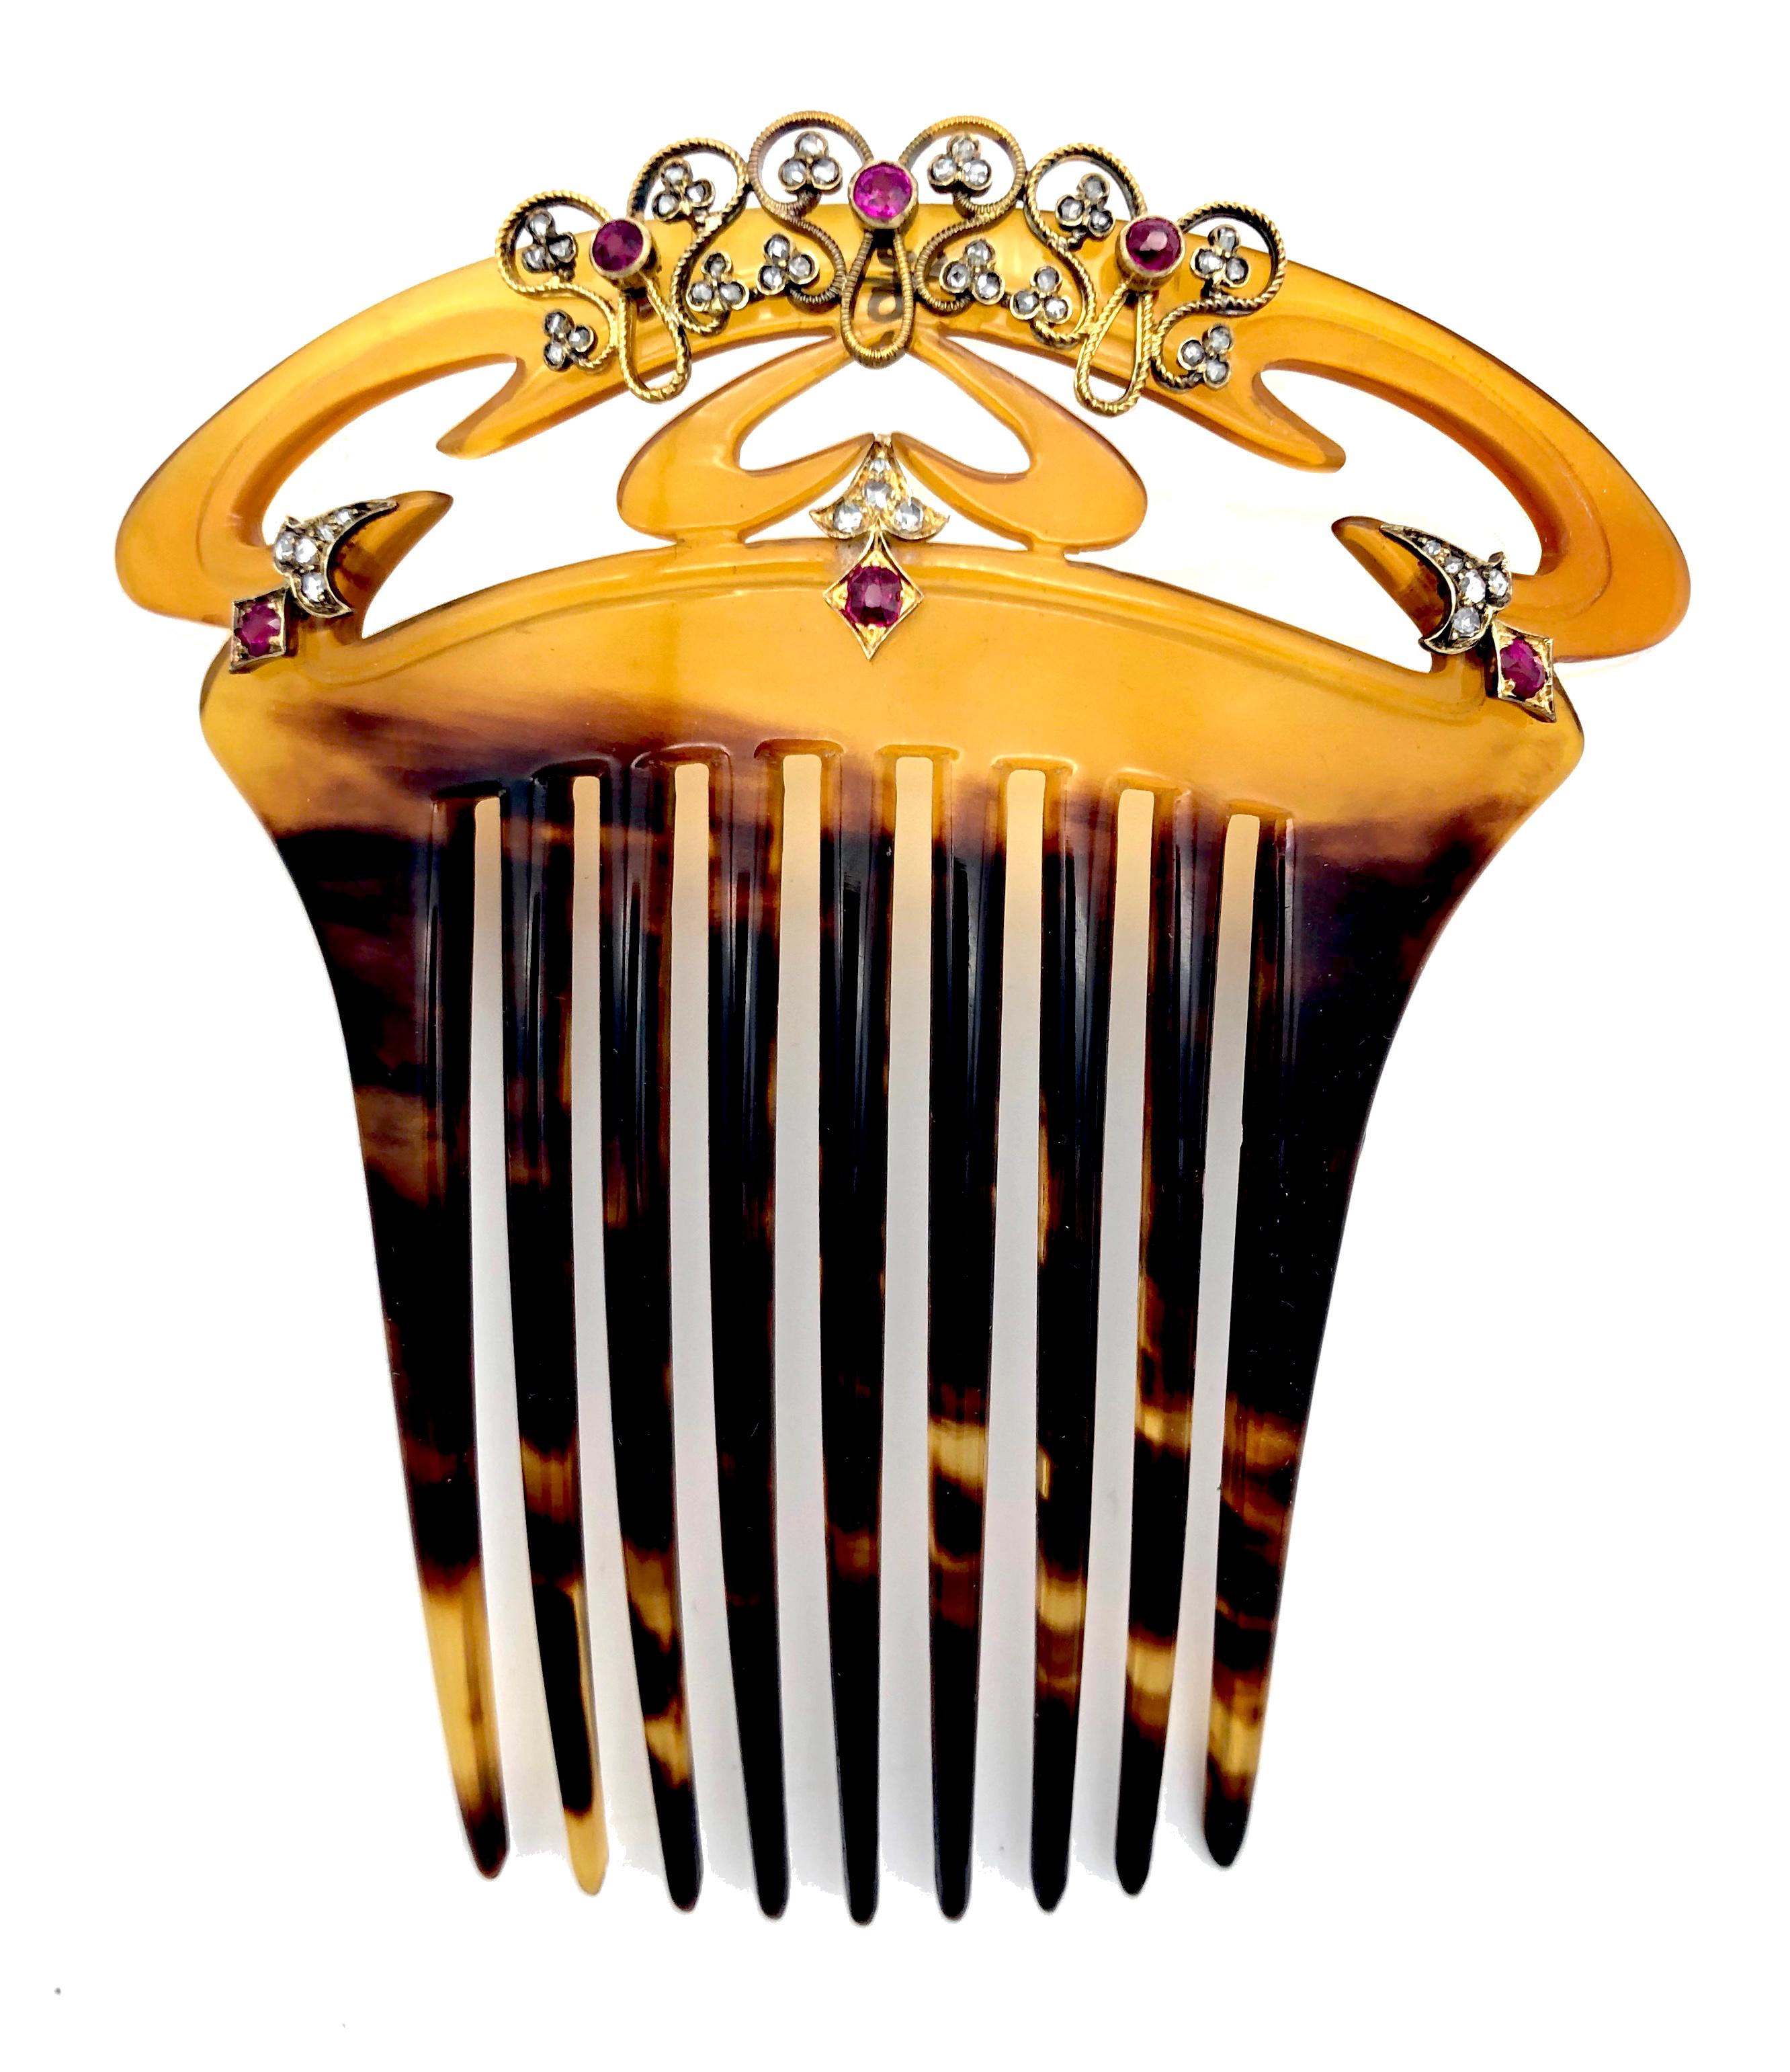 This exquisite carved tortoise shell hair comb is decorated with undulated, chiselled gold wire which is embellished with three gold set round facetted rubies and twelve small three-leaf clovers set with old cut diamonds. Another three lozenge